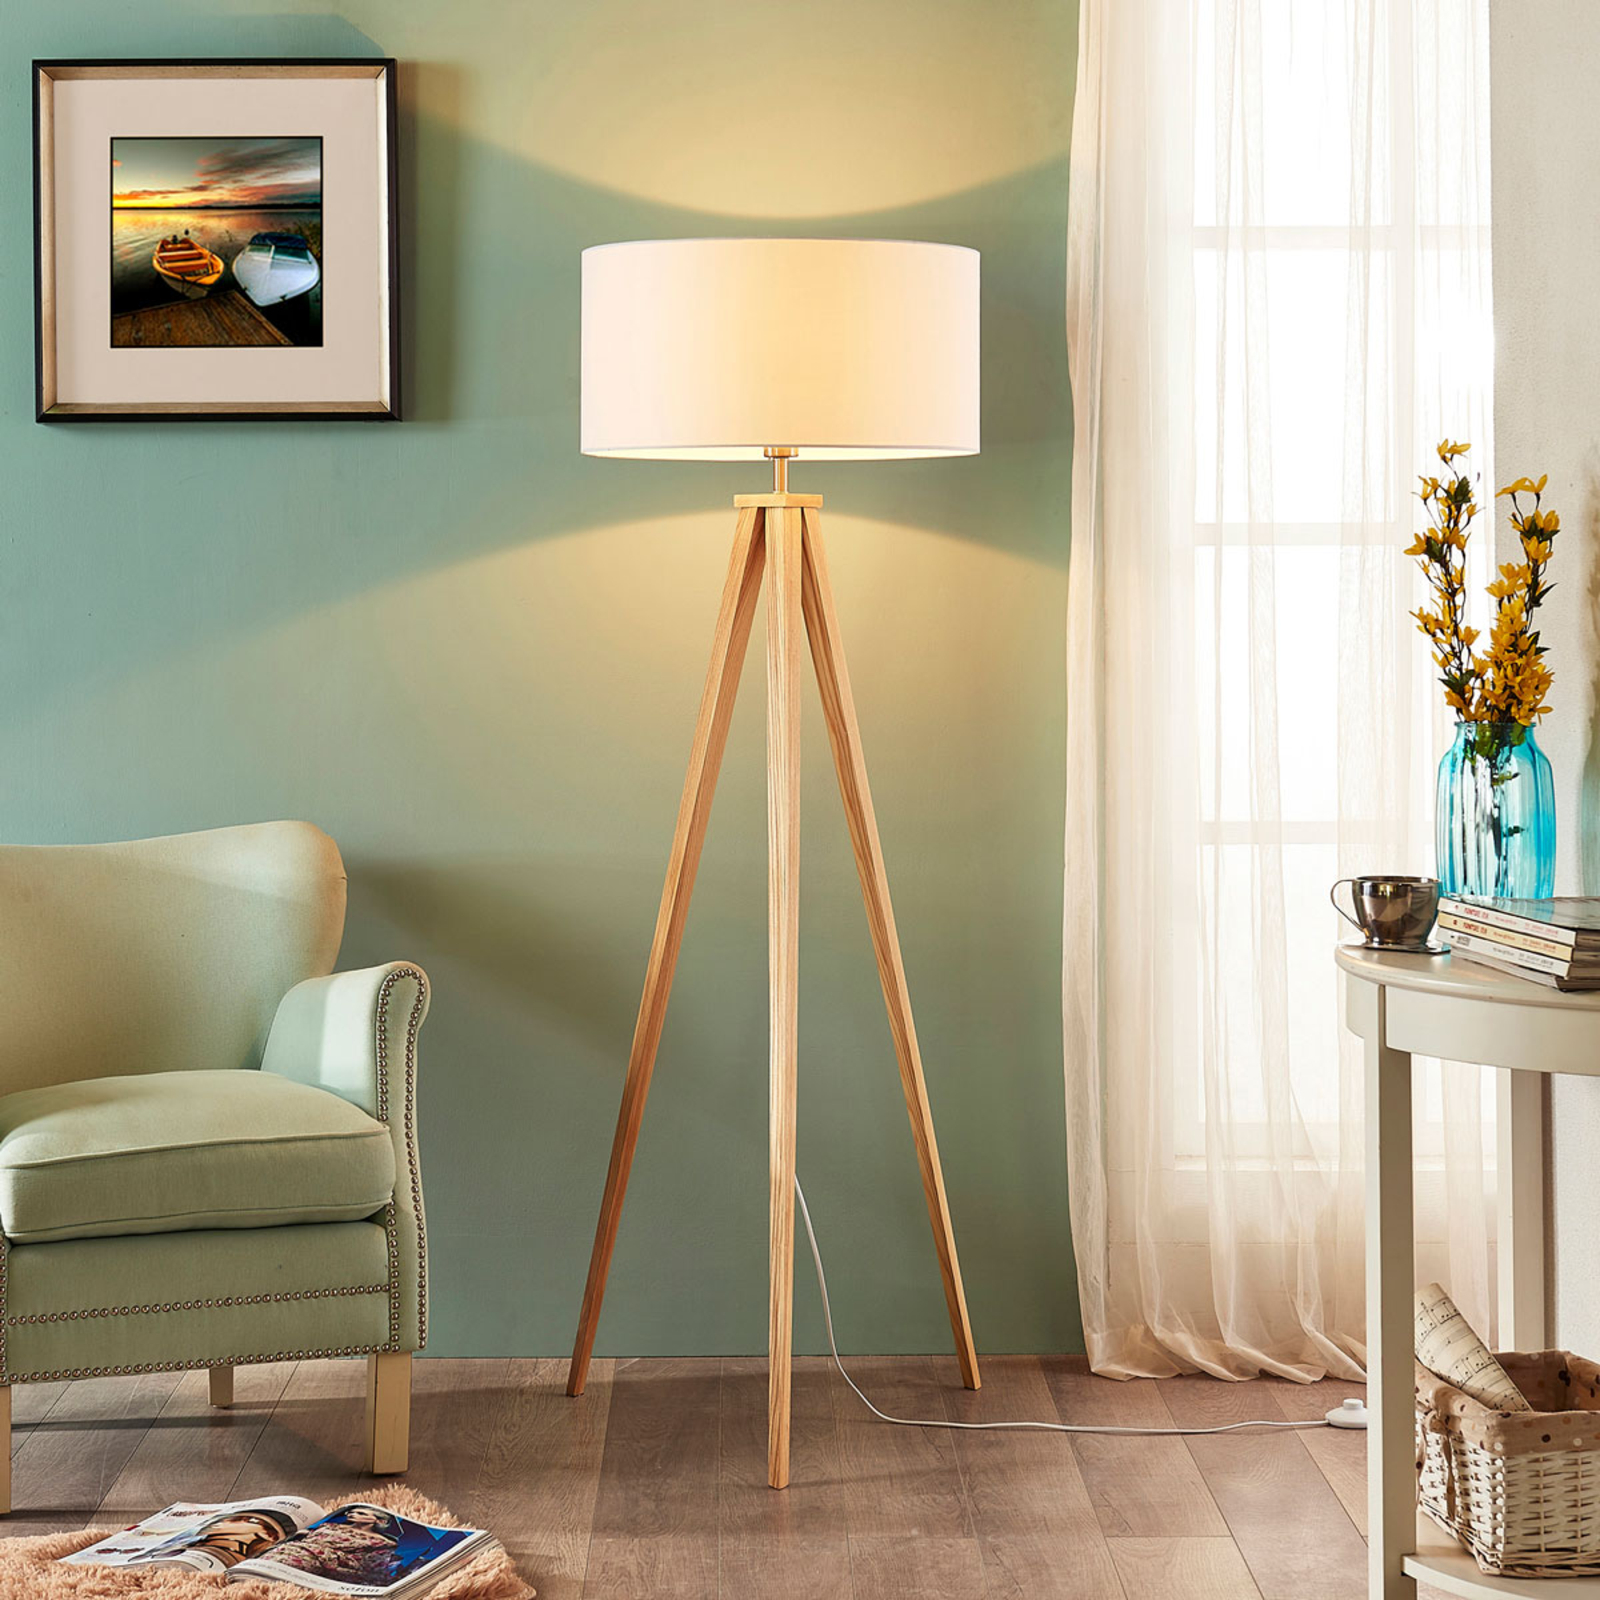 Tripod floor lamp Mya with a white lampshade